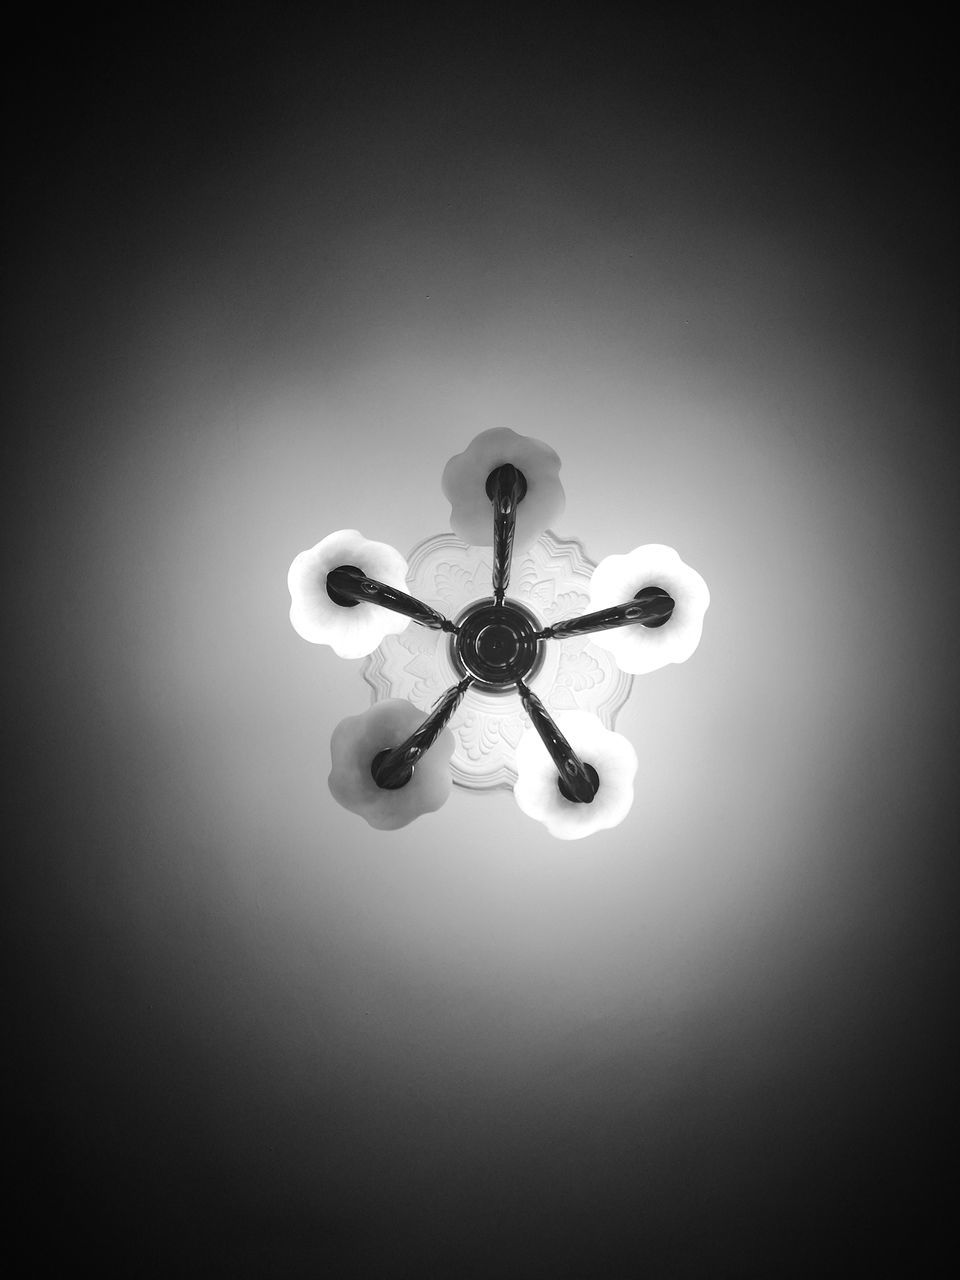 low angle view, electricity, ceiling fan, ceiling, indoors, no people, electric fan, vignette, hanging, illuminated, close-up, day